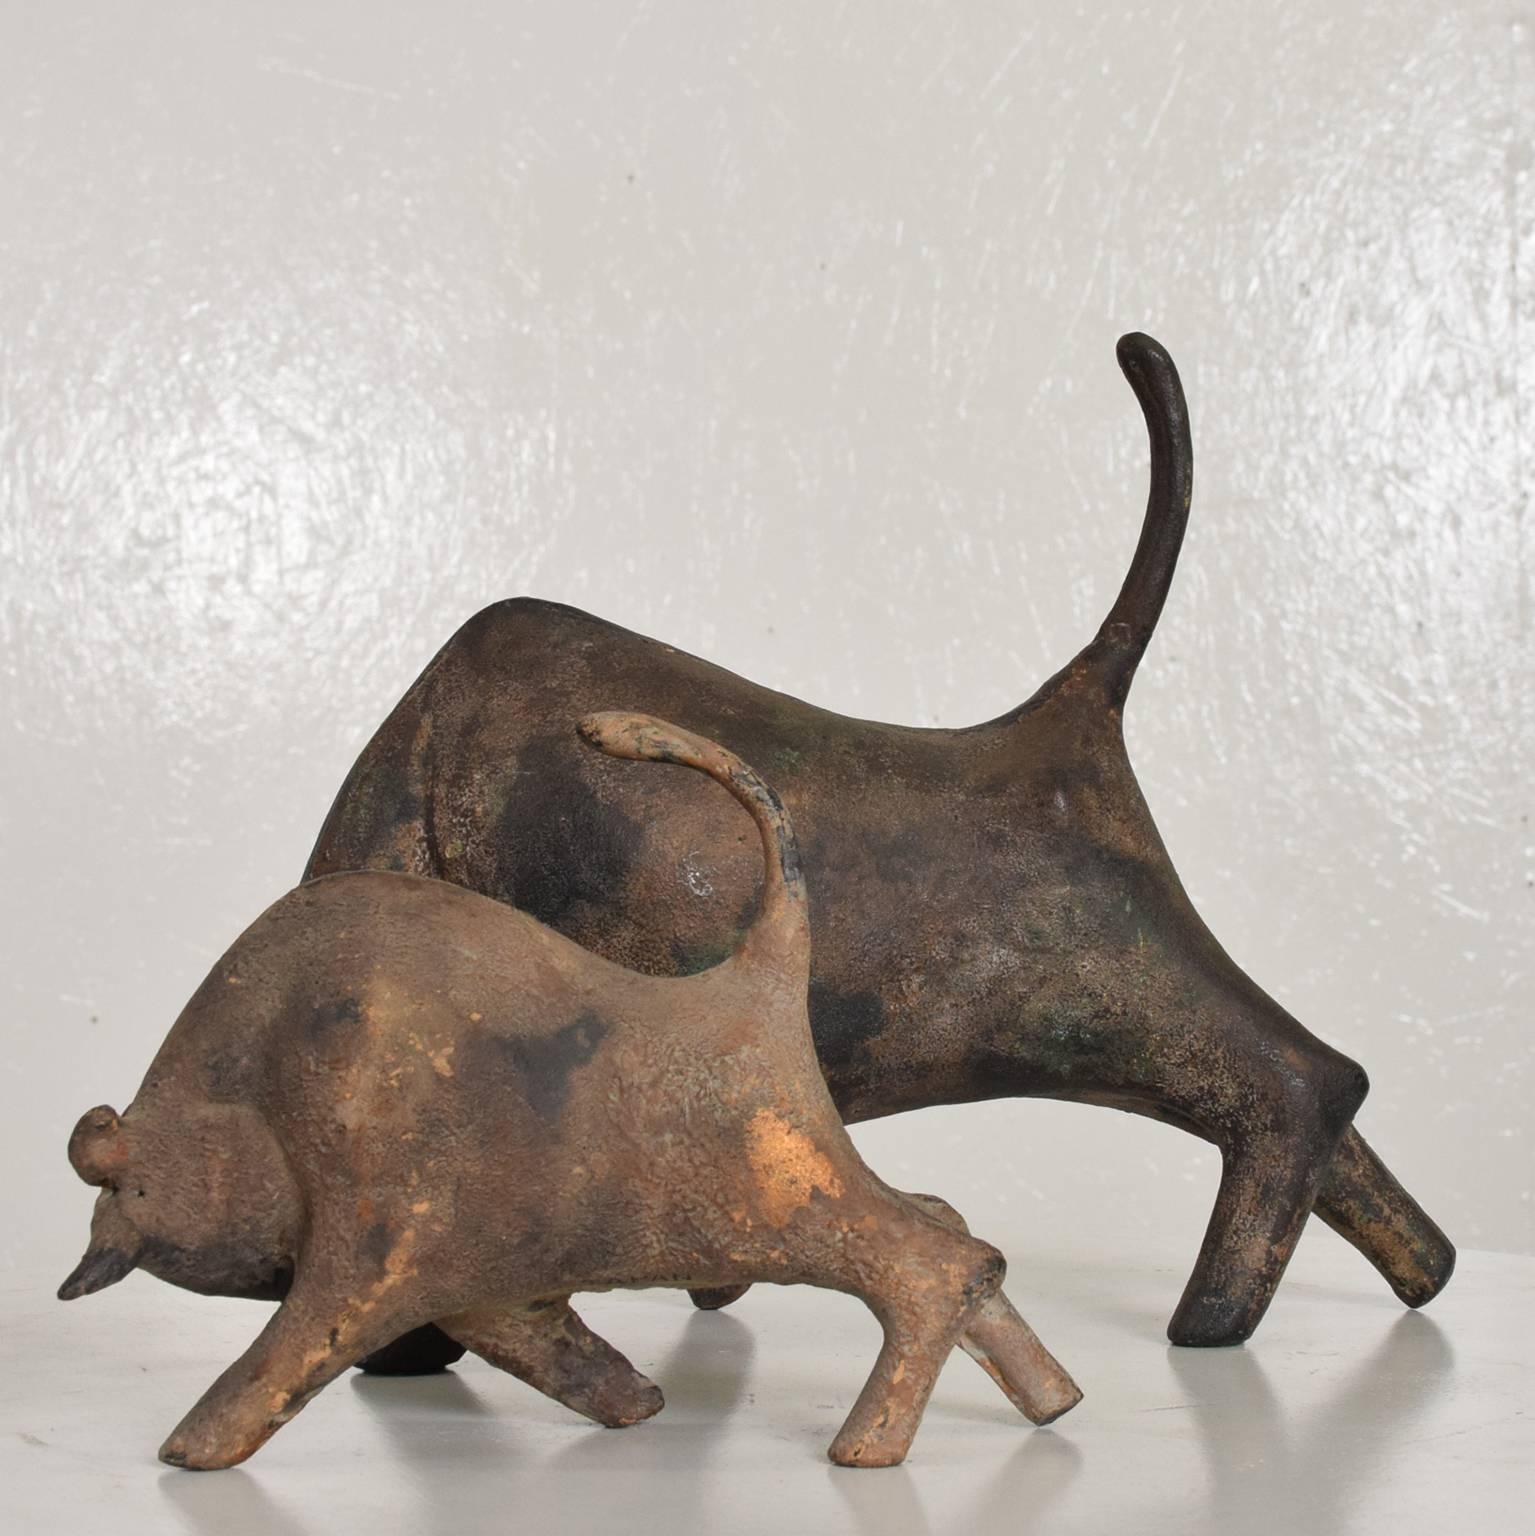 Patinated Pair of Mid-Century Modern Bull Table Sculptures, Iron, Japan